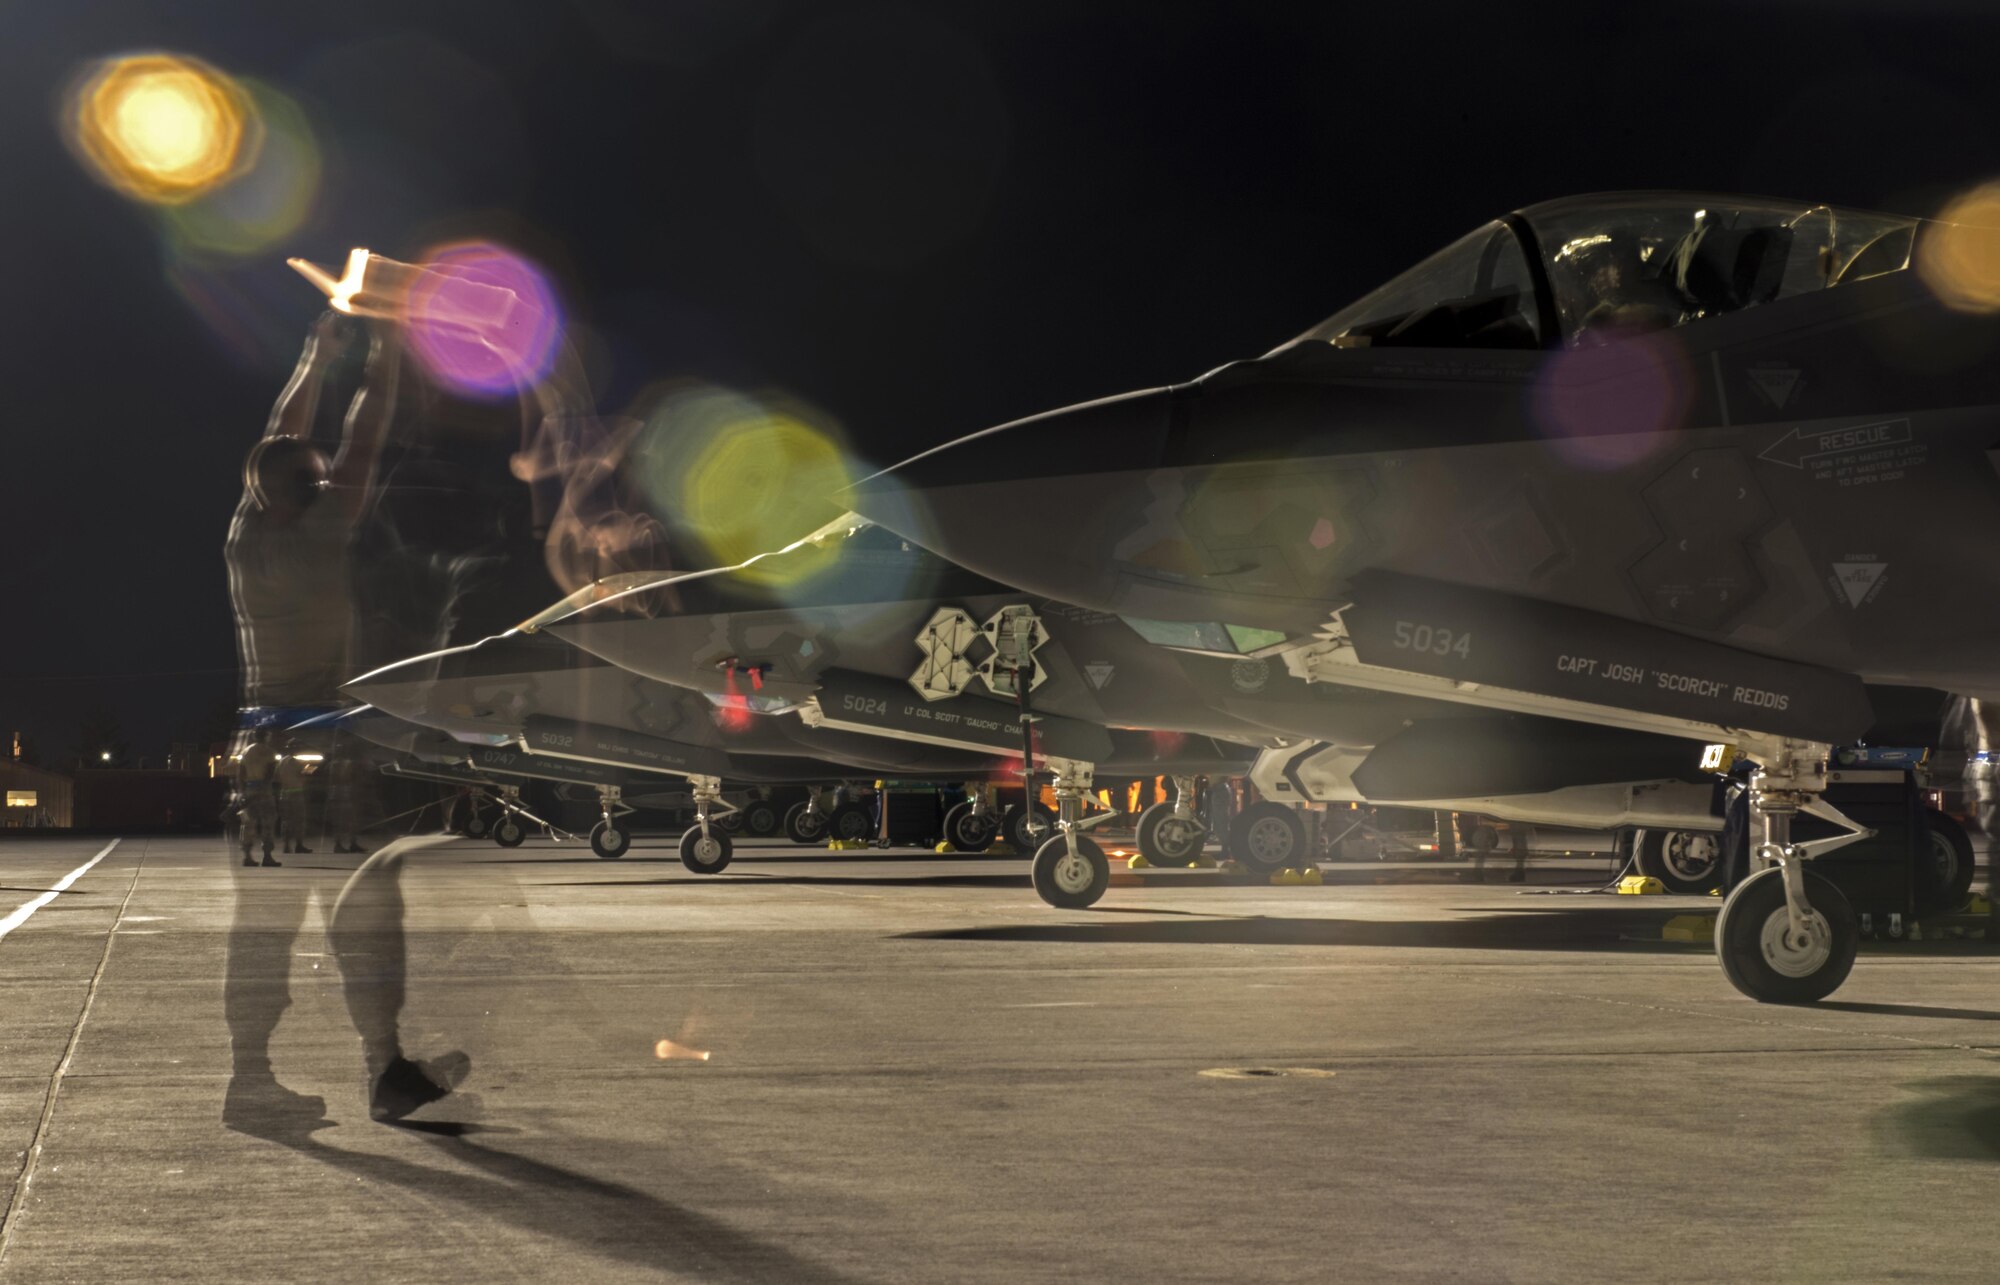 U.S. Air Force Airman 1st Class Travis Jackson, 33rd Aircraft Maintenance Squadron assistant dedicated crew chief, marshals an F-35A Lightning II July 18, 2017, at Nellis Air Force Base, Nev. The 33rd Fighter Wing and Marine Attack Squadron 221 from Yuma, Ariz., participated in the first combat exercise with Air Force F-35As and Marine Corps F-35Bs operating simultaneously during Red Flag 17-3. The large scale exercise, which was developed to provide pilots with critical experience in combat situations, enabled F-35 pilots to plan and train using the same tactics, techniques and procedures. (U.S. Air Force photo by Staff Sgt. Peter Thompson)